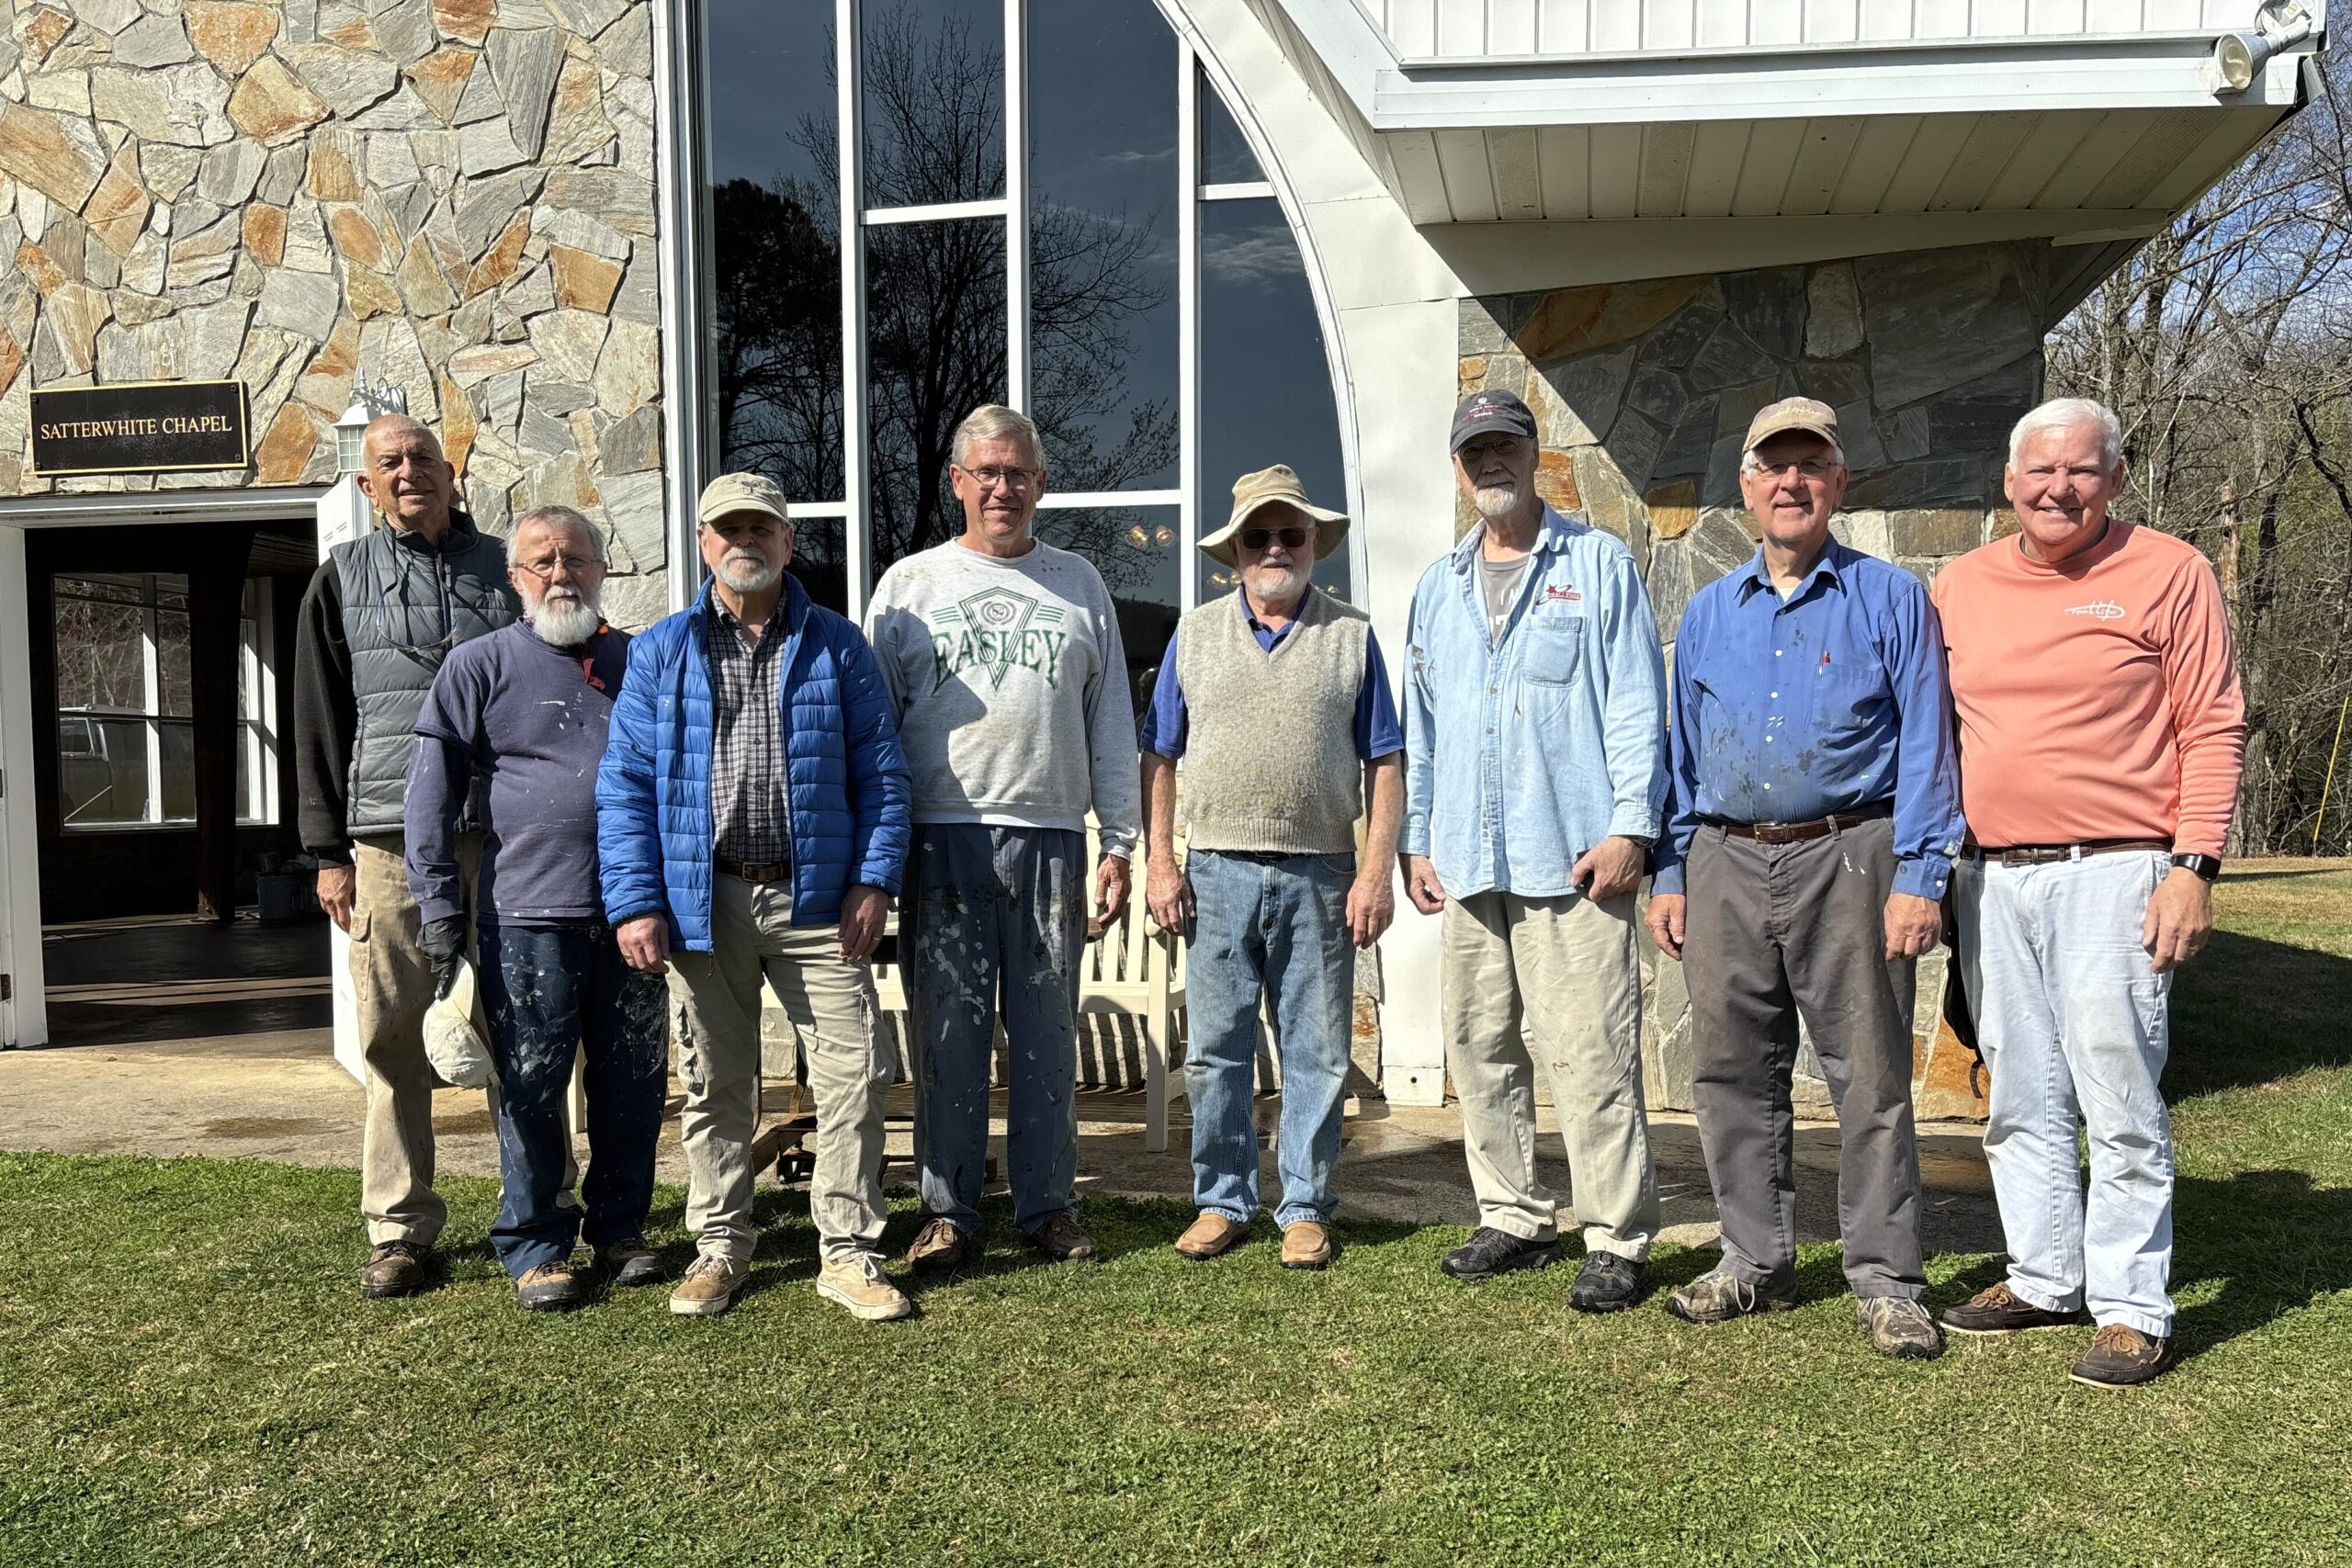 Retirees Serving the Lord through Construction